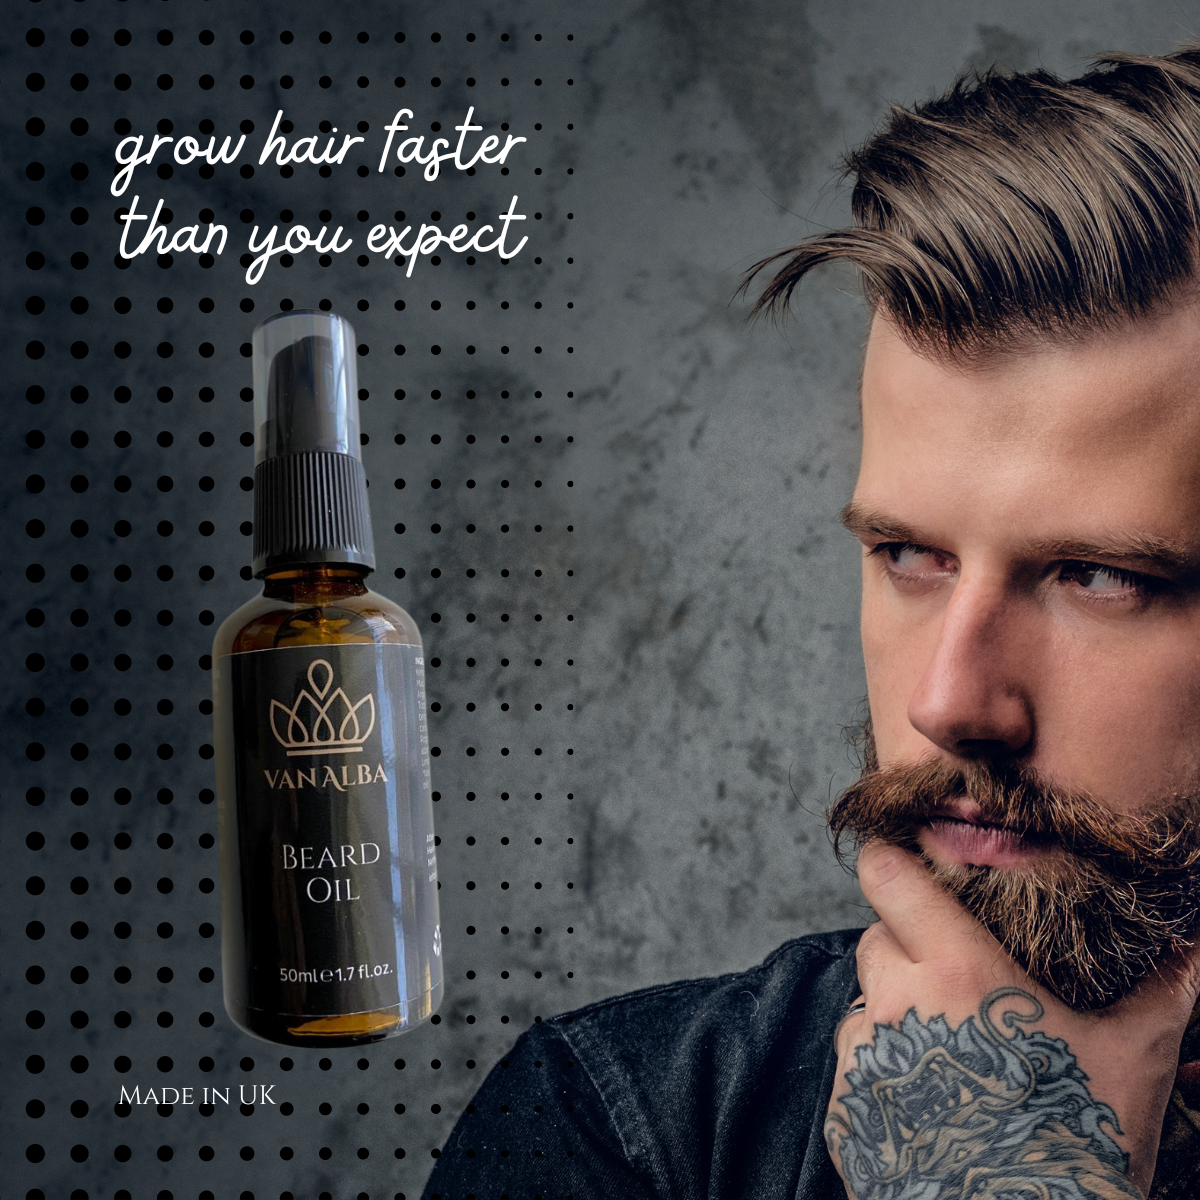 Beard oil- 50 ml - natural blend of apricot and avocado oils